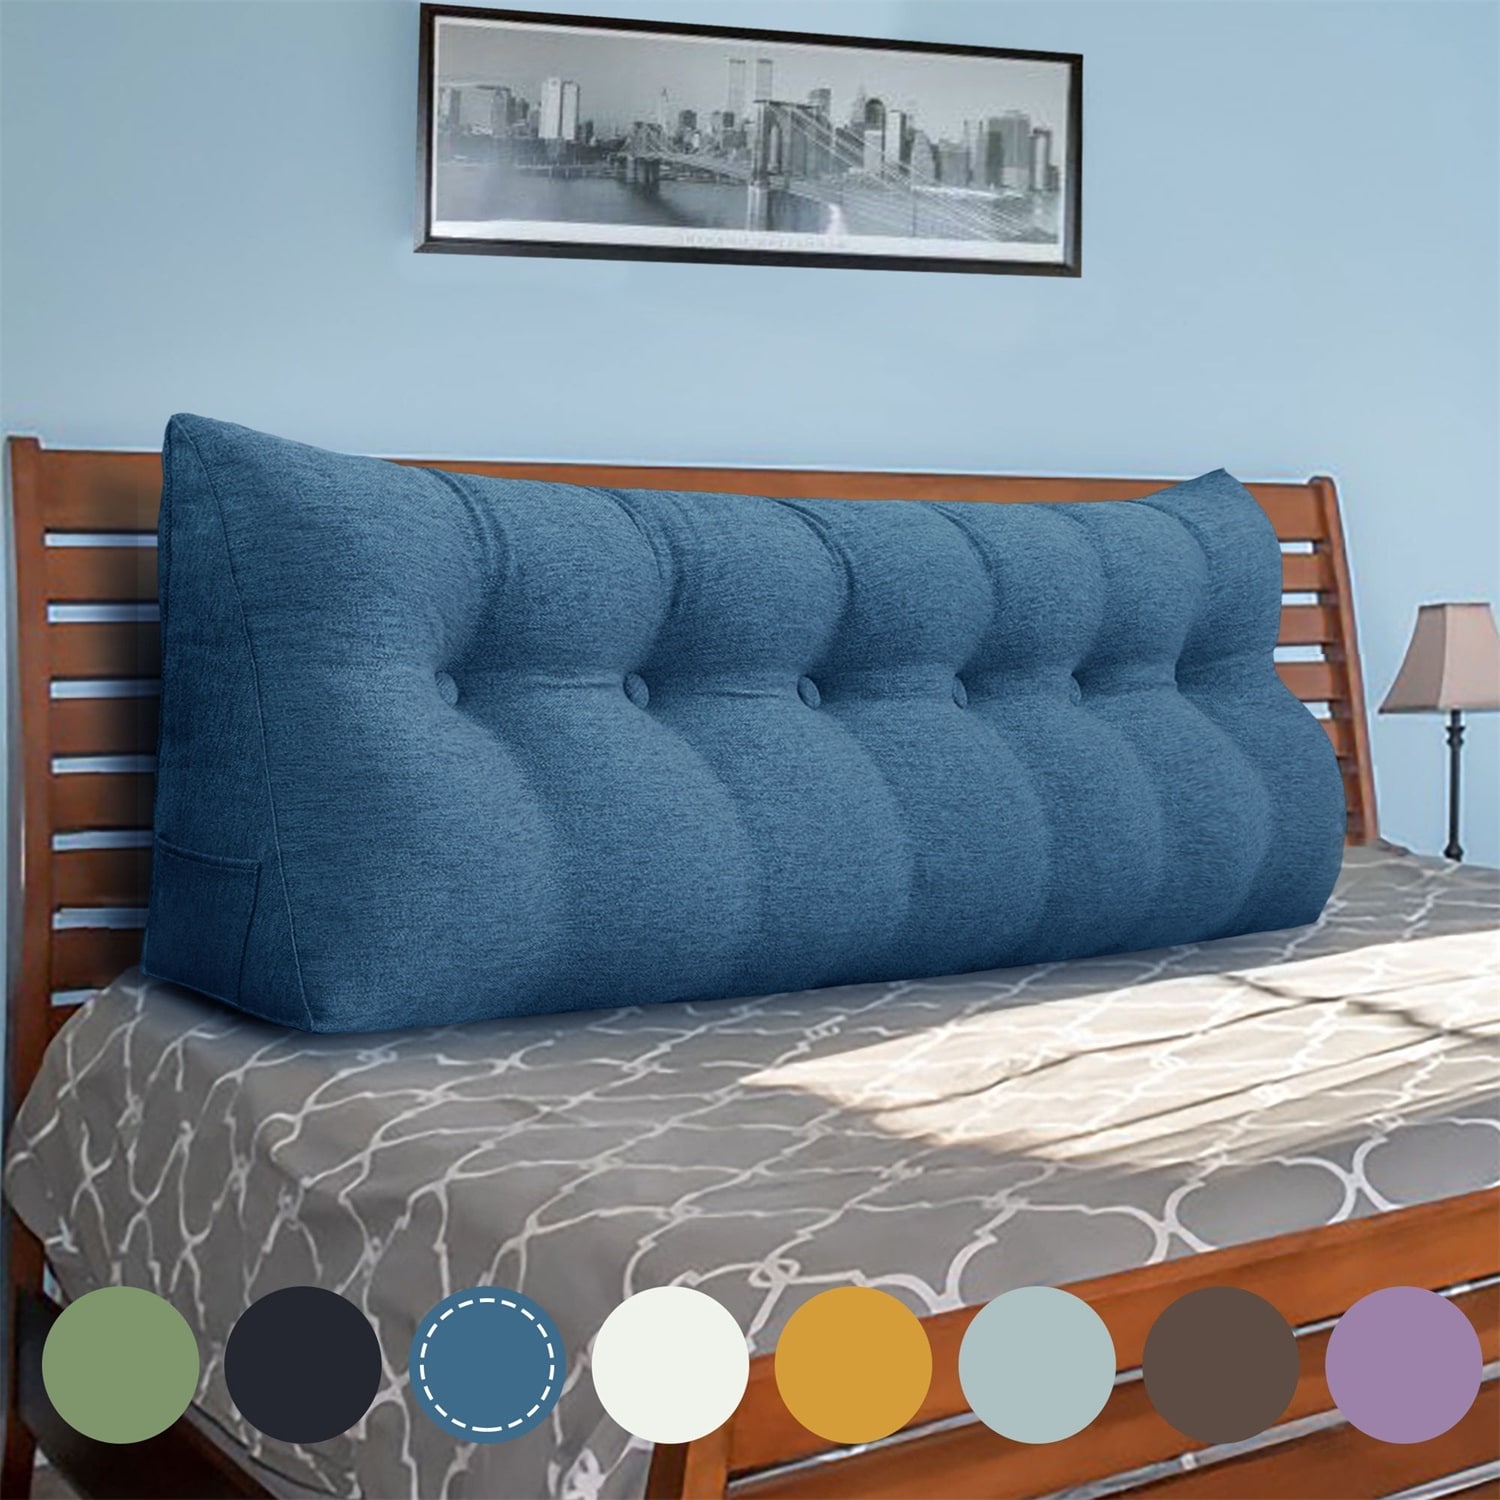 https://ak1.ostkcdn.com/images/products/is/images/direct/6e24901f70fd6acf006625f5ffefc29592da0a44/WOWMAX-Bed-Rest-Reading-Wedge-Headboard-Backrest-Tufted-Pillow.jpg